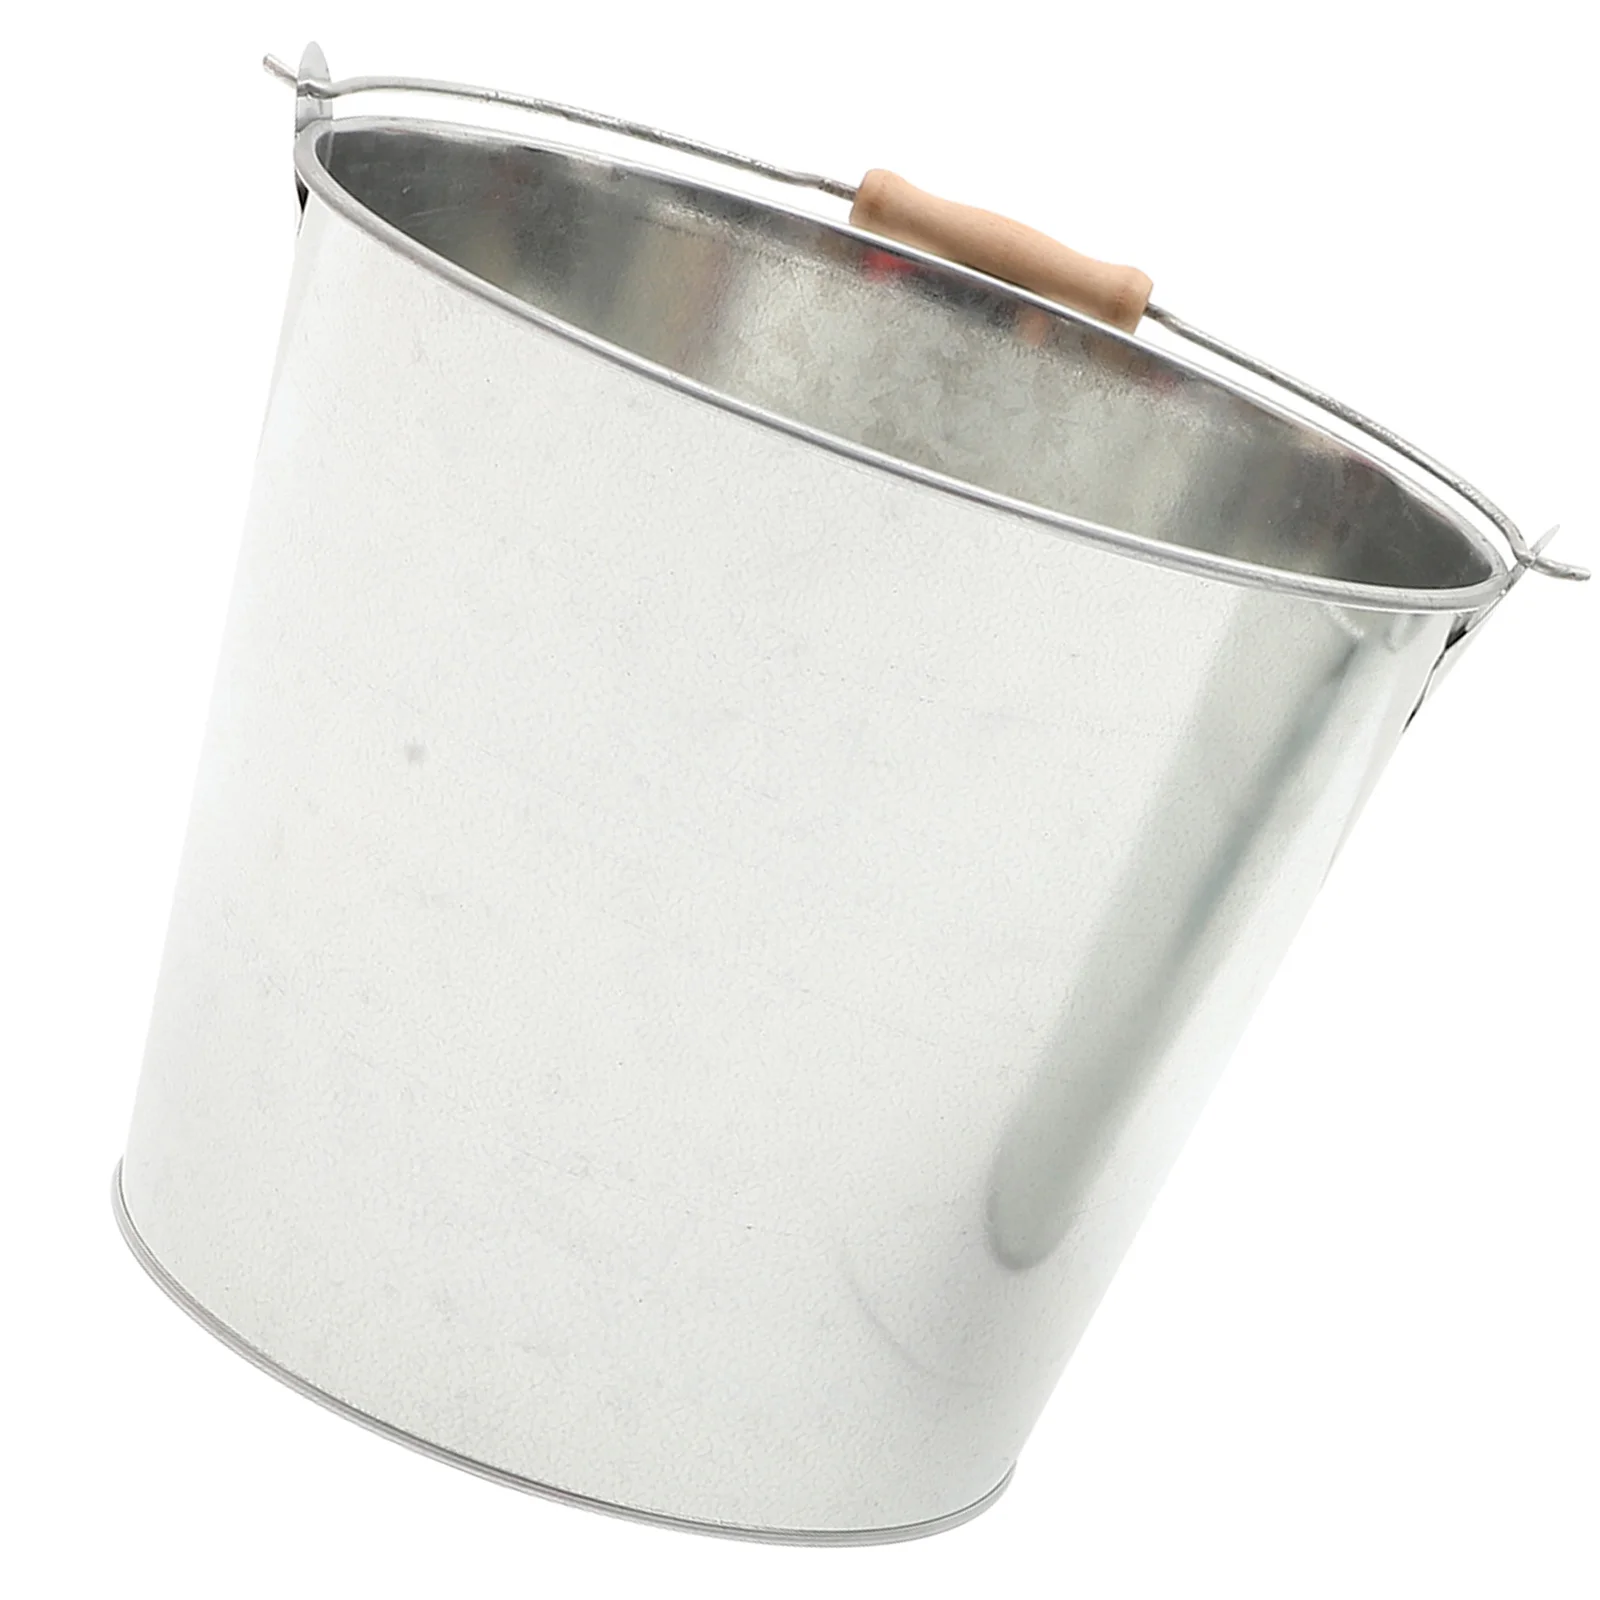 

Bucket Ash Fireplace Storage Metal Pail Can Burning Oil Coal Holder Container Wood Stove Charcoal Incinerator Bin Indoor Fire